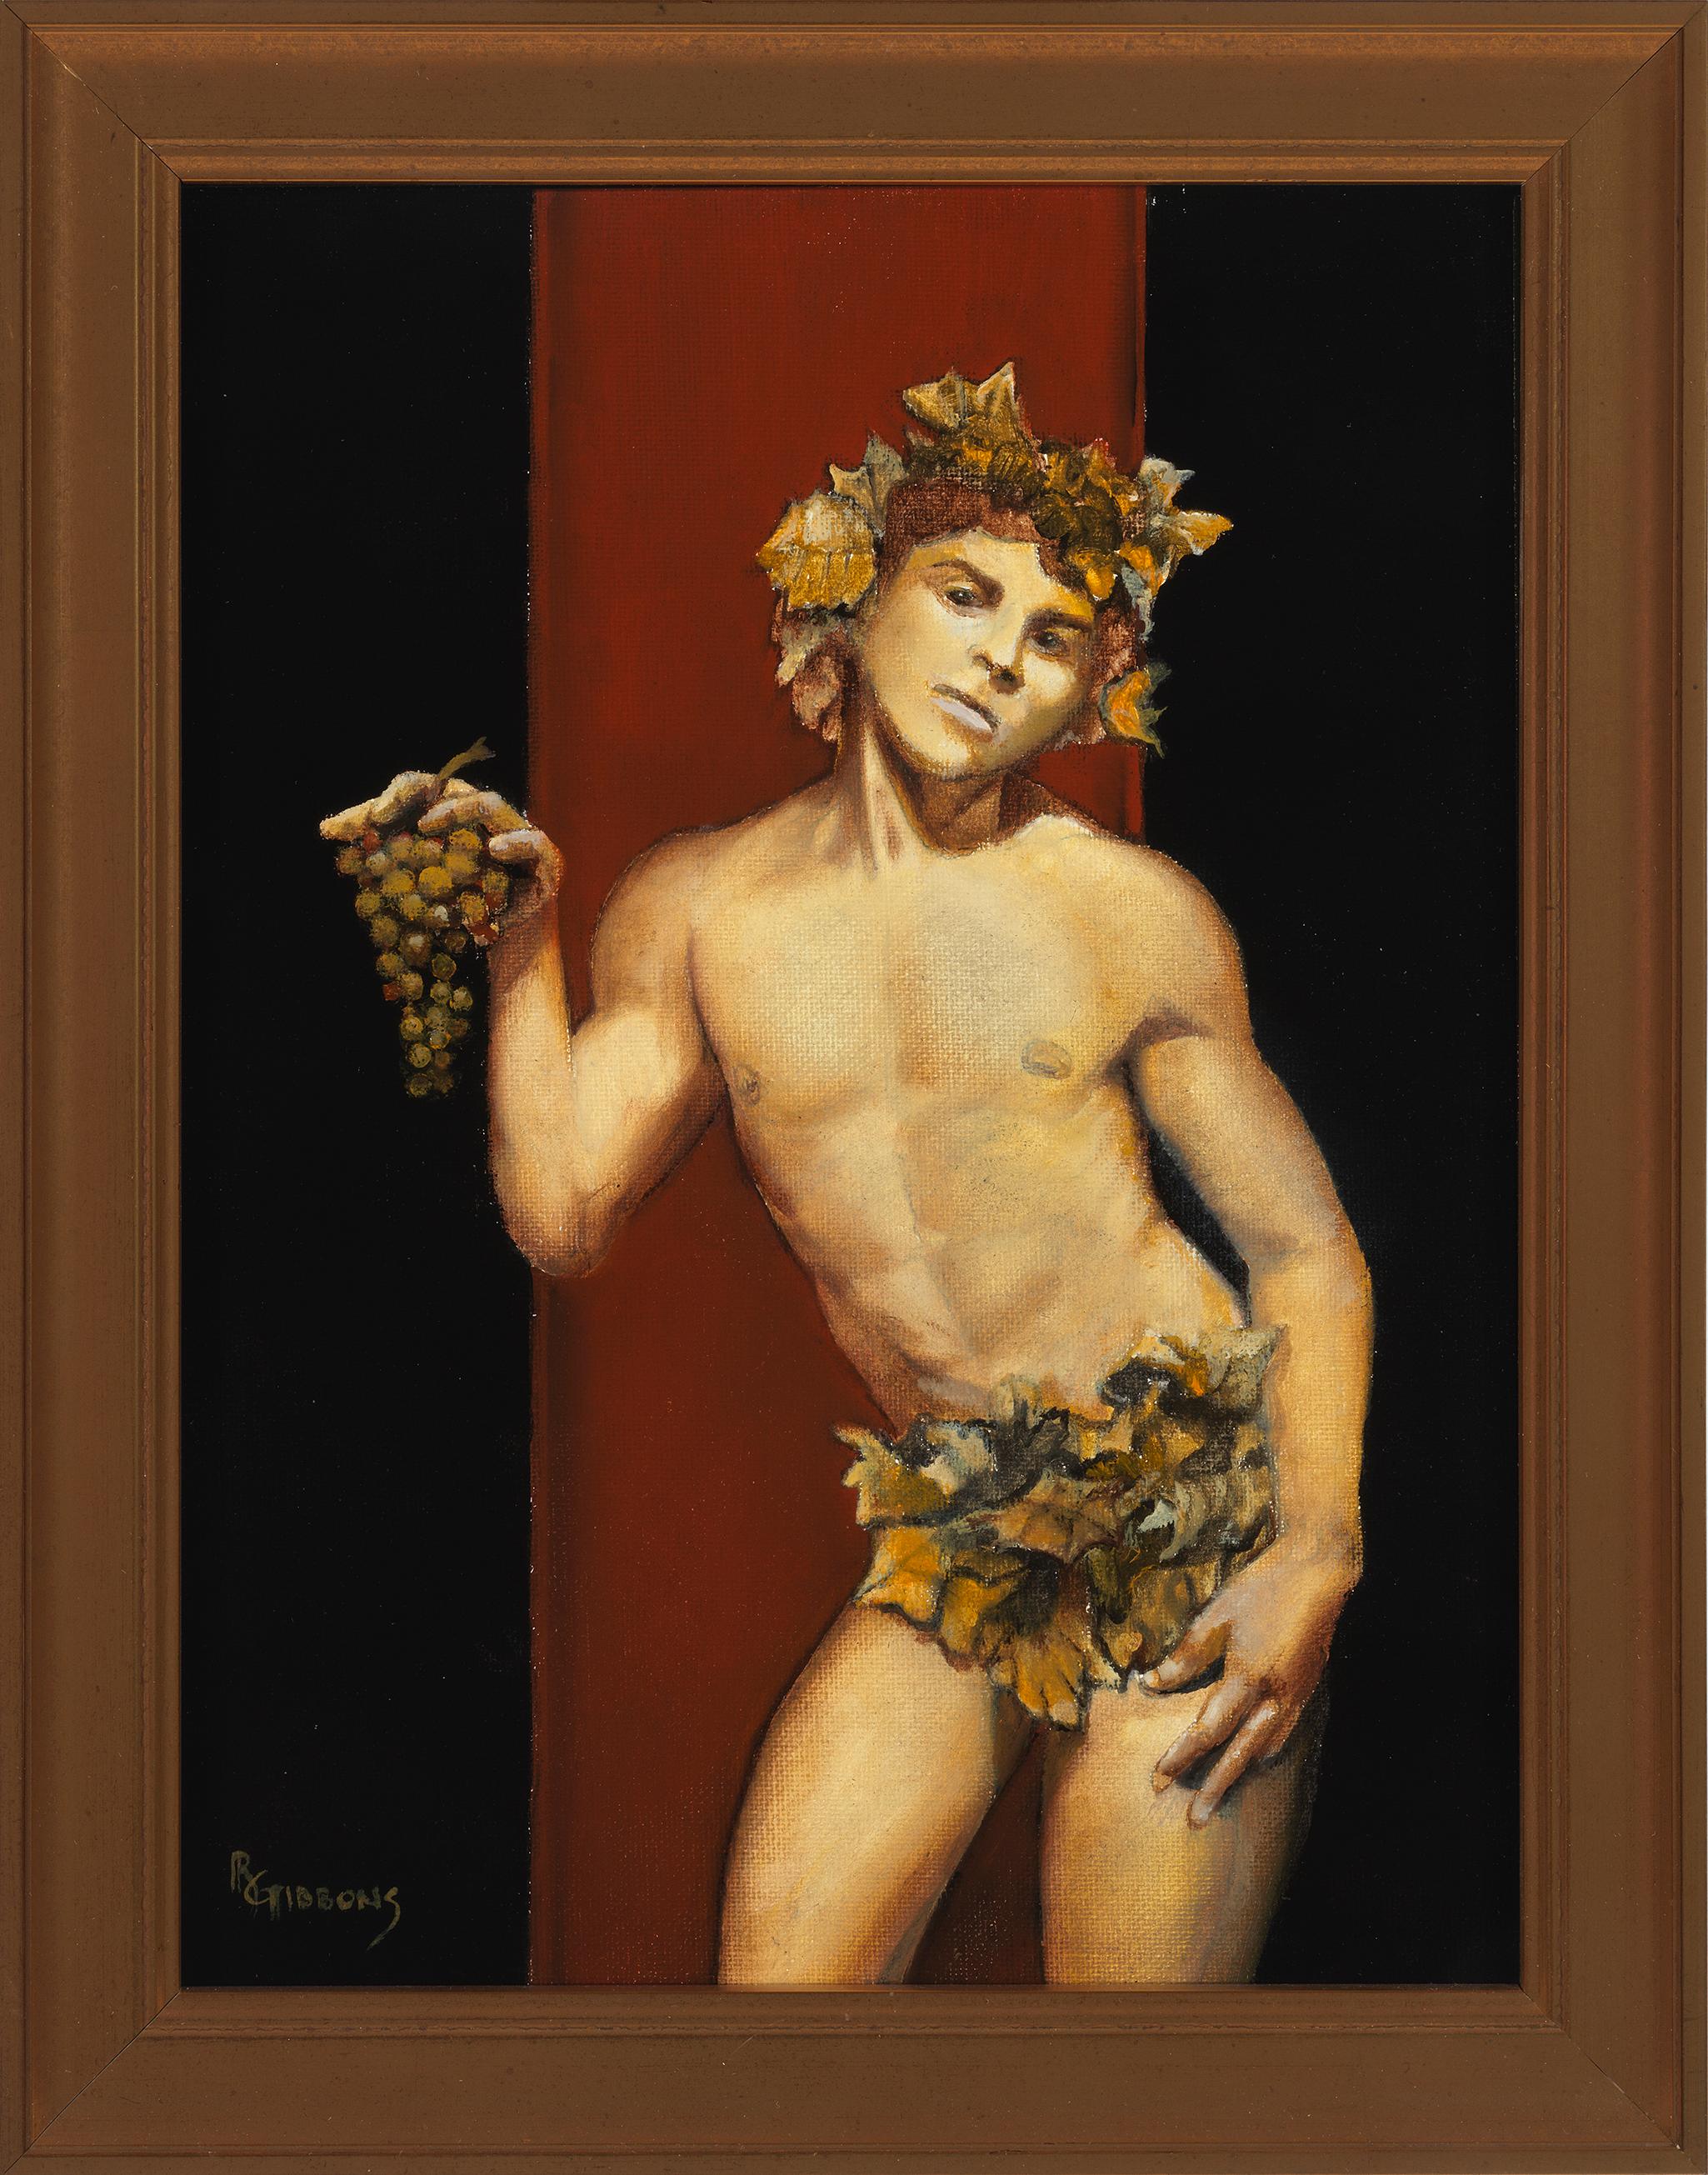 Young Bacchus - Partially Nude Male on Burgundy and Black Background - Painting by Richard Gibbons